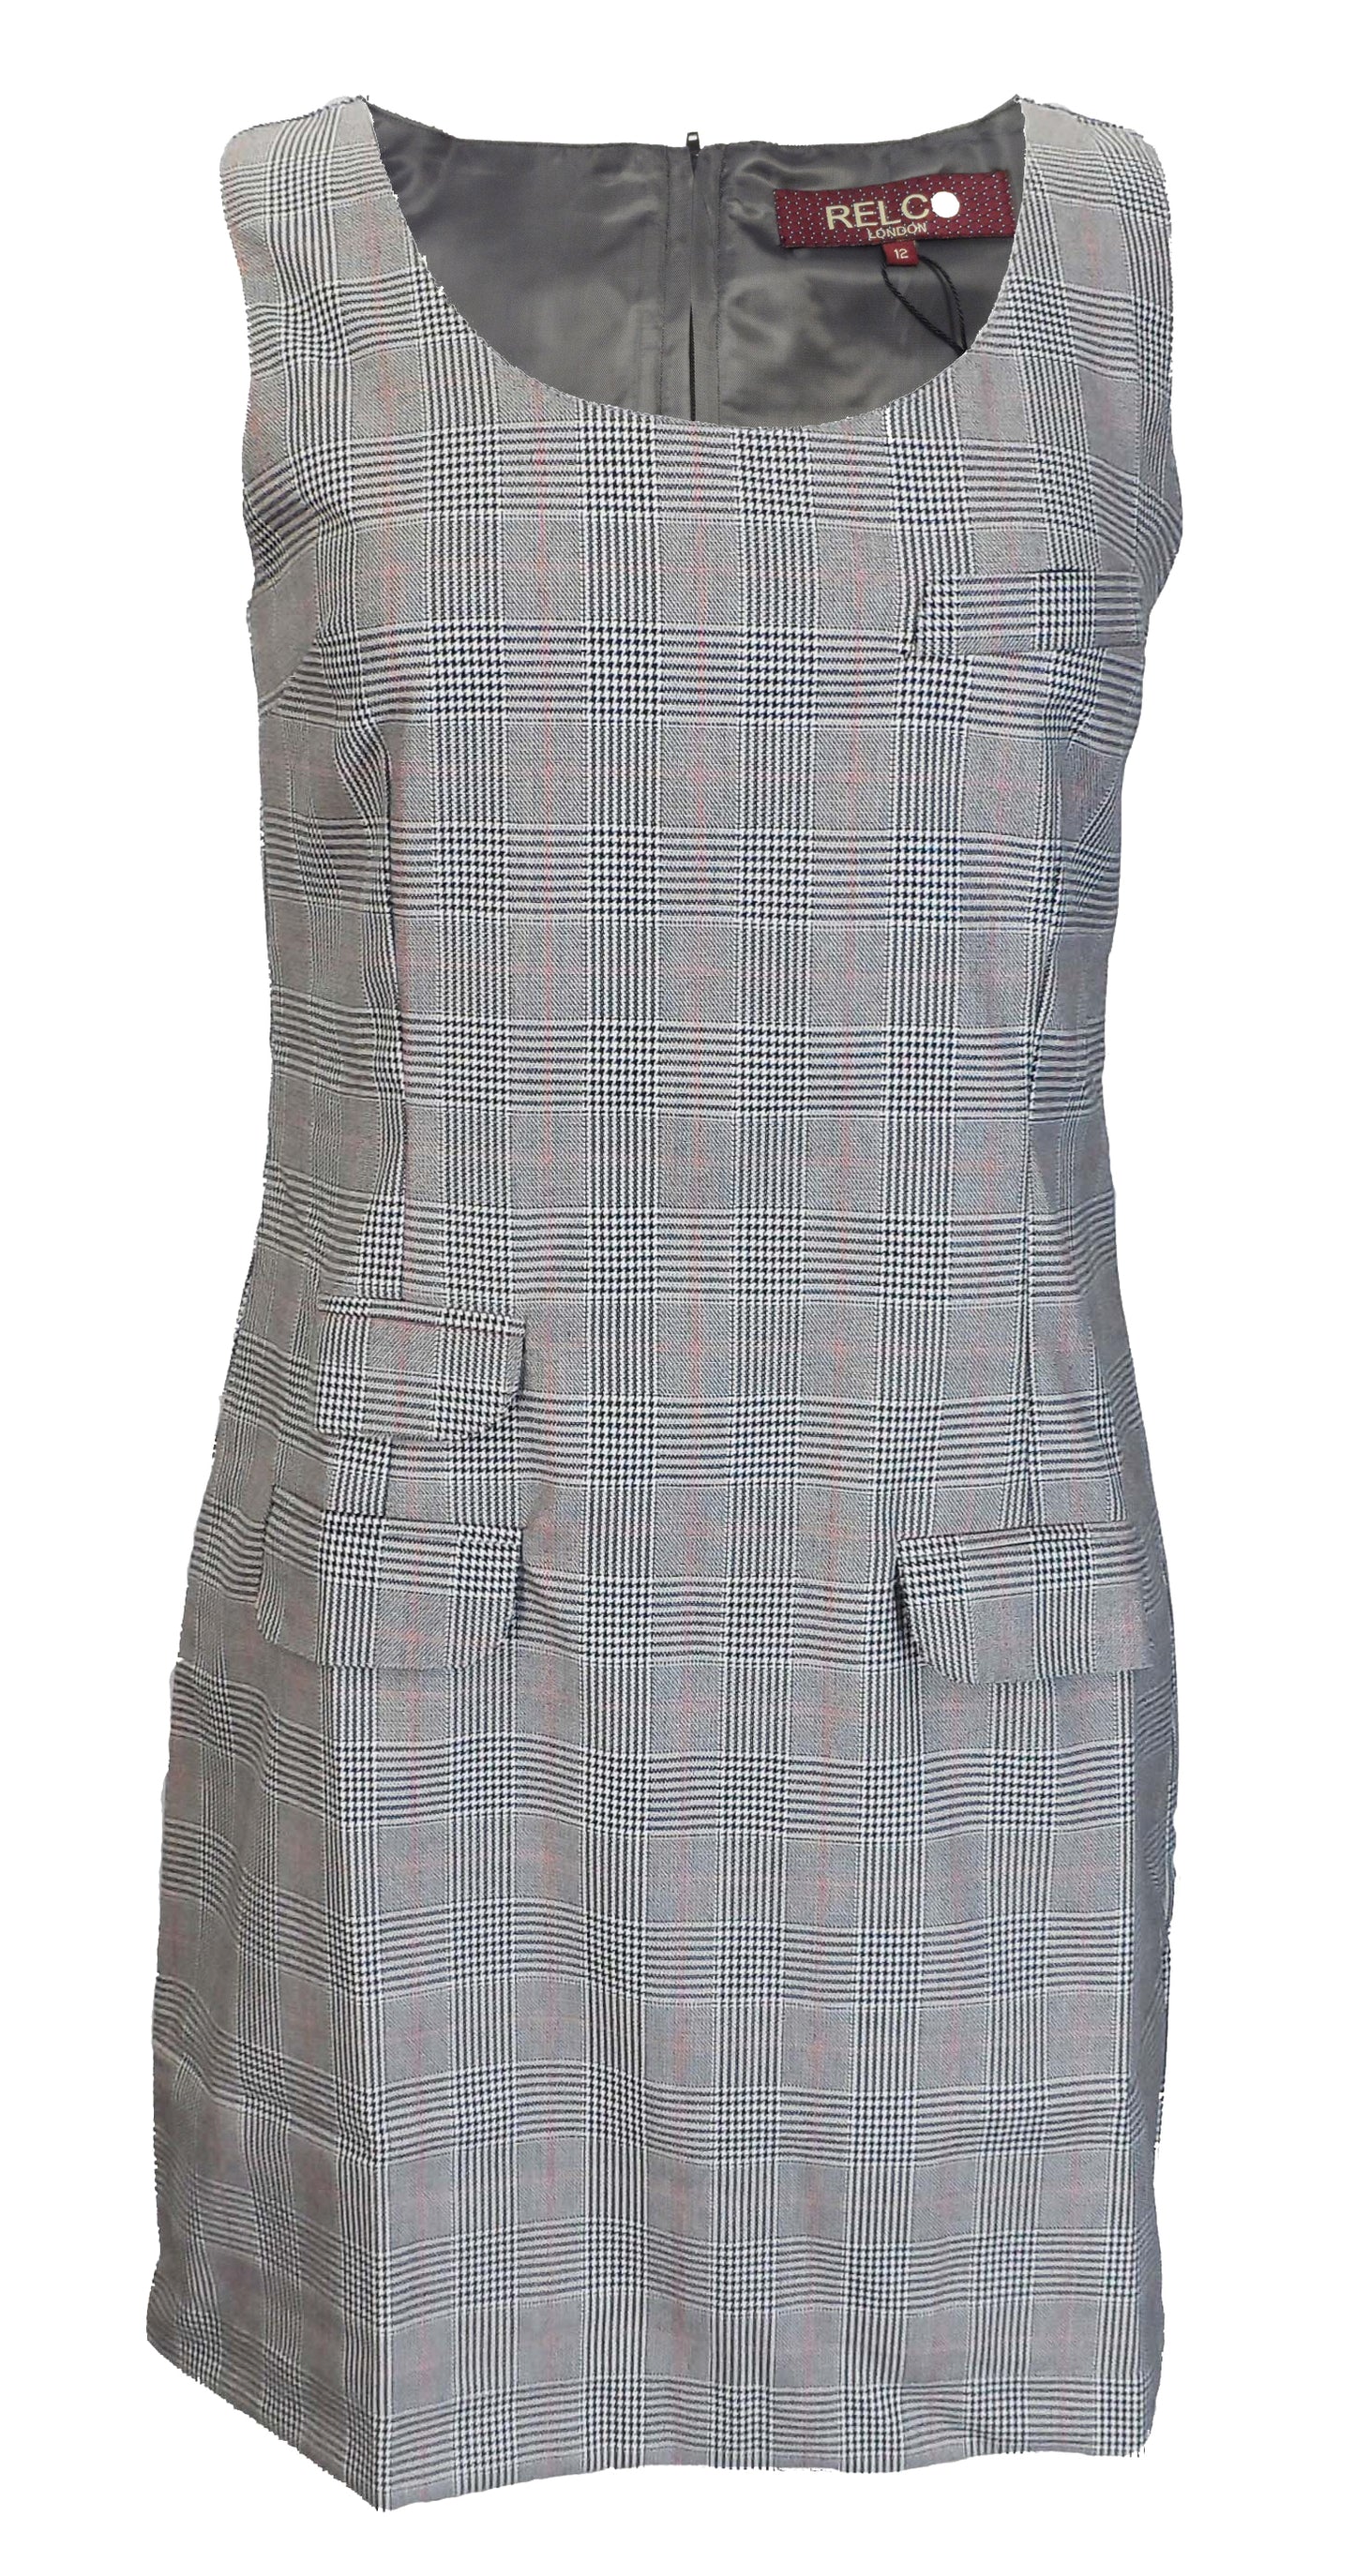 Relco Ladies Retro Mod Prince of Wales Pinafore/Tunic Dress